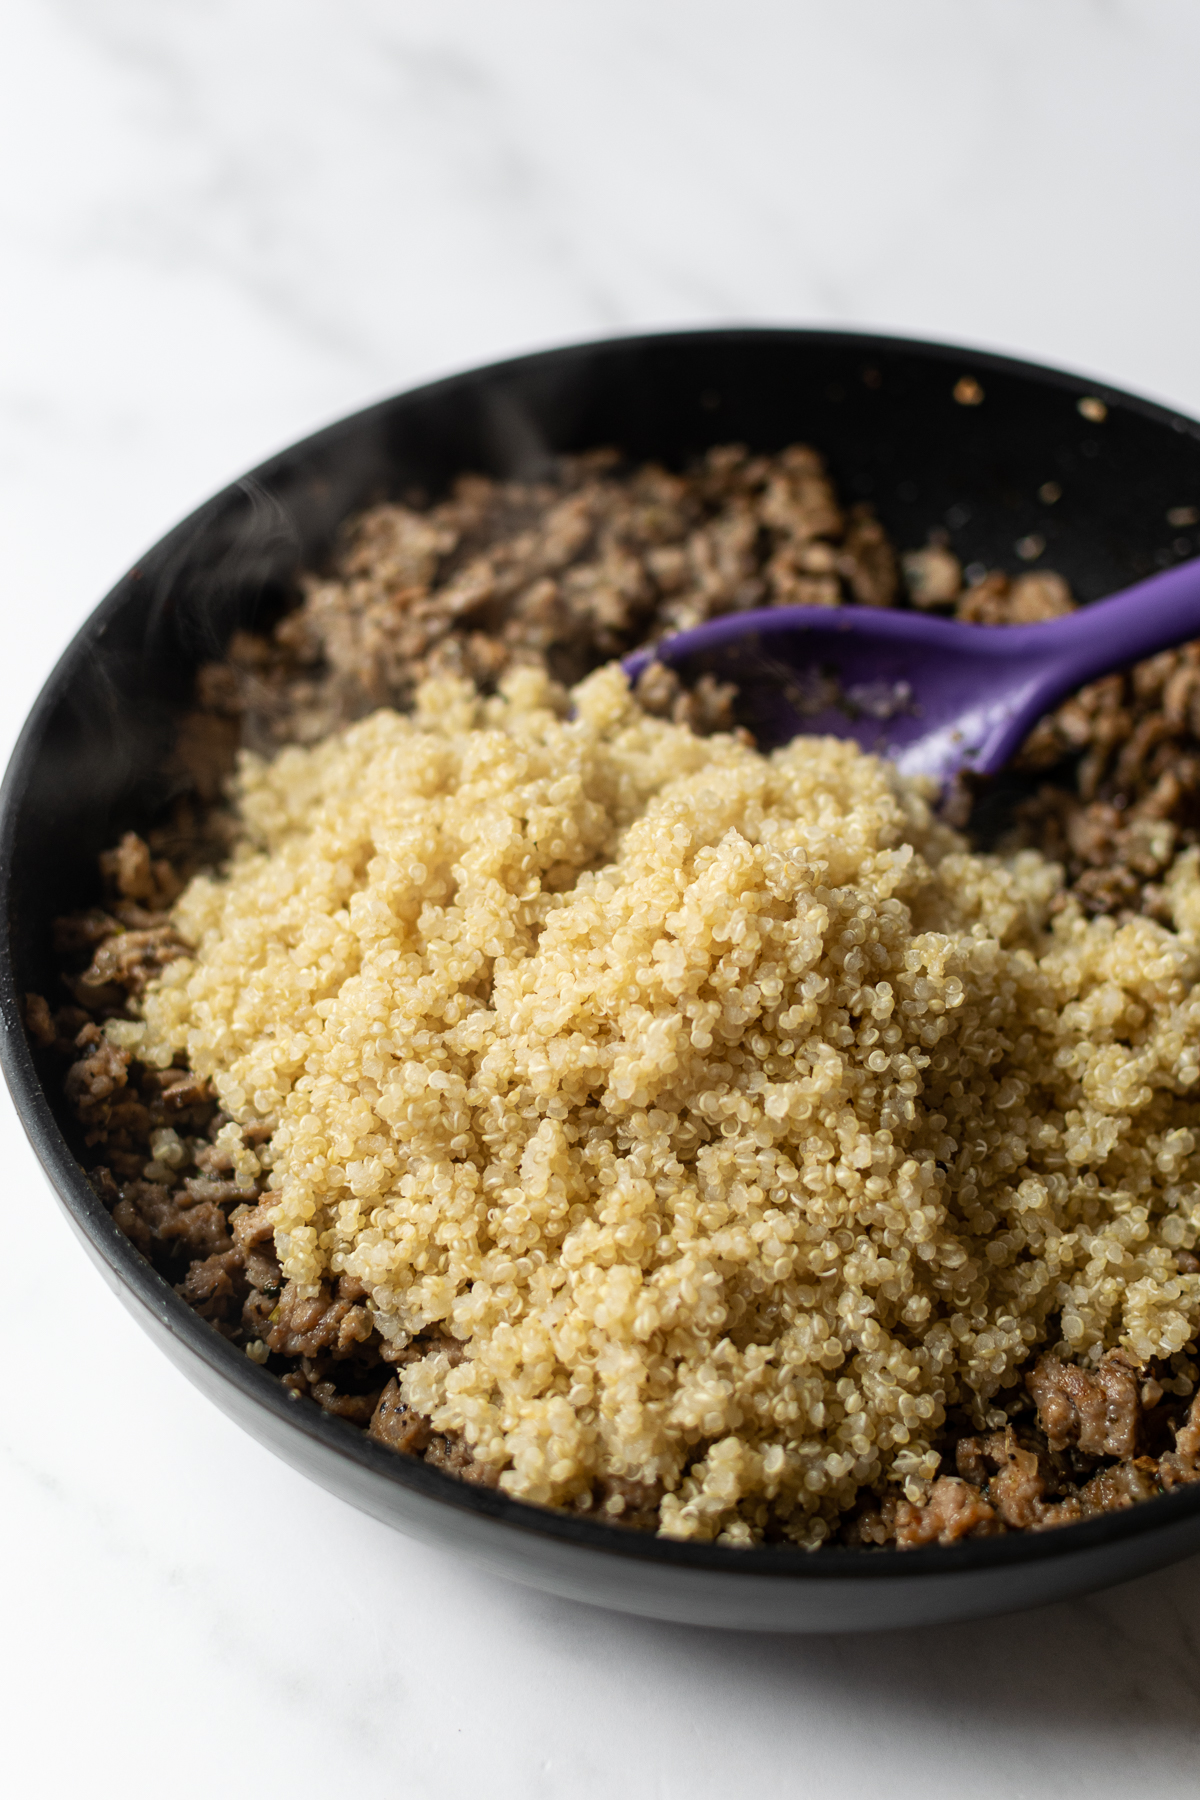 cooked ground sausage and quinoa in a black pan with a spoon.